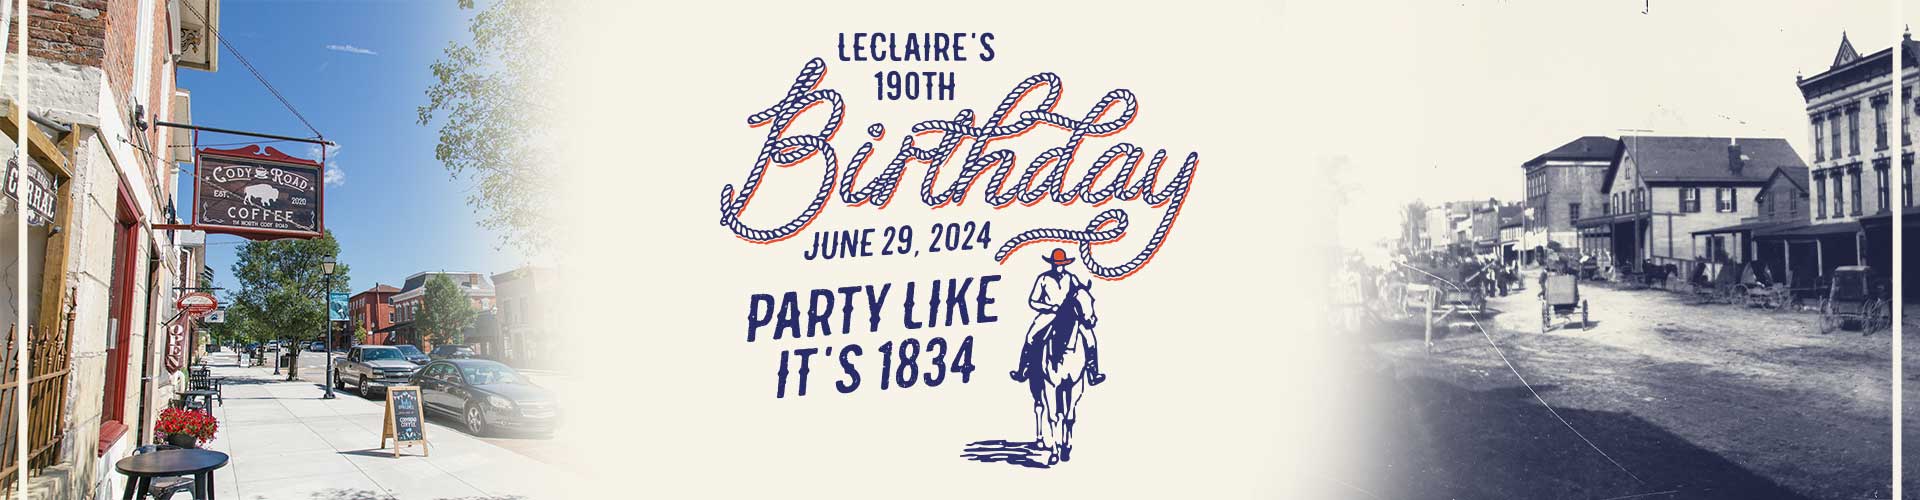 LeClaire's 190th Birthday - June 29, 2024 - Party Like It's 1934